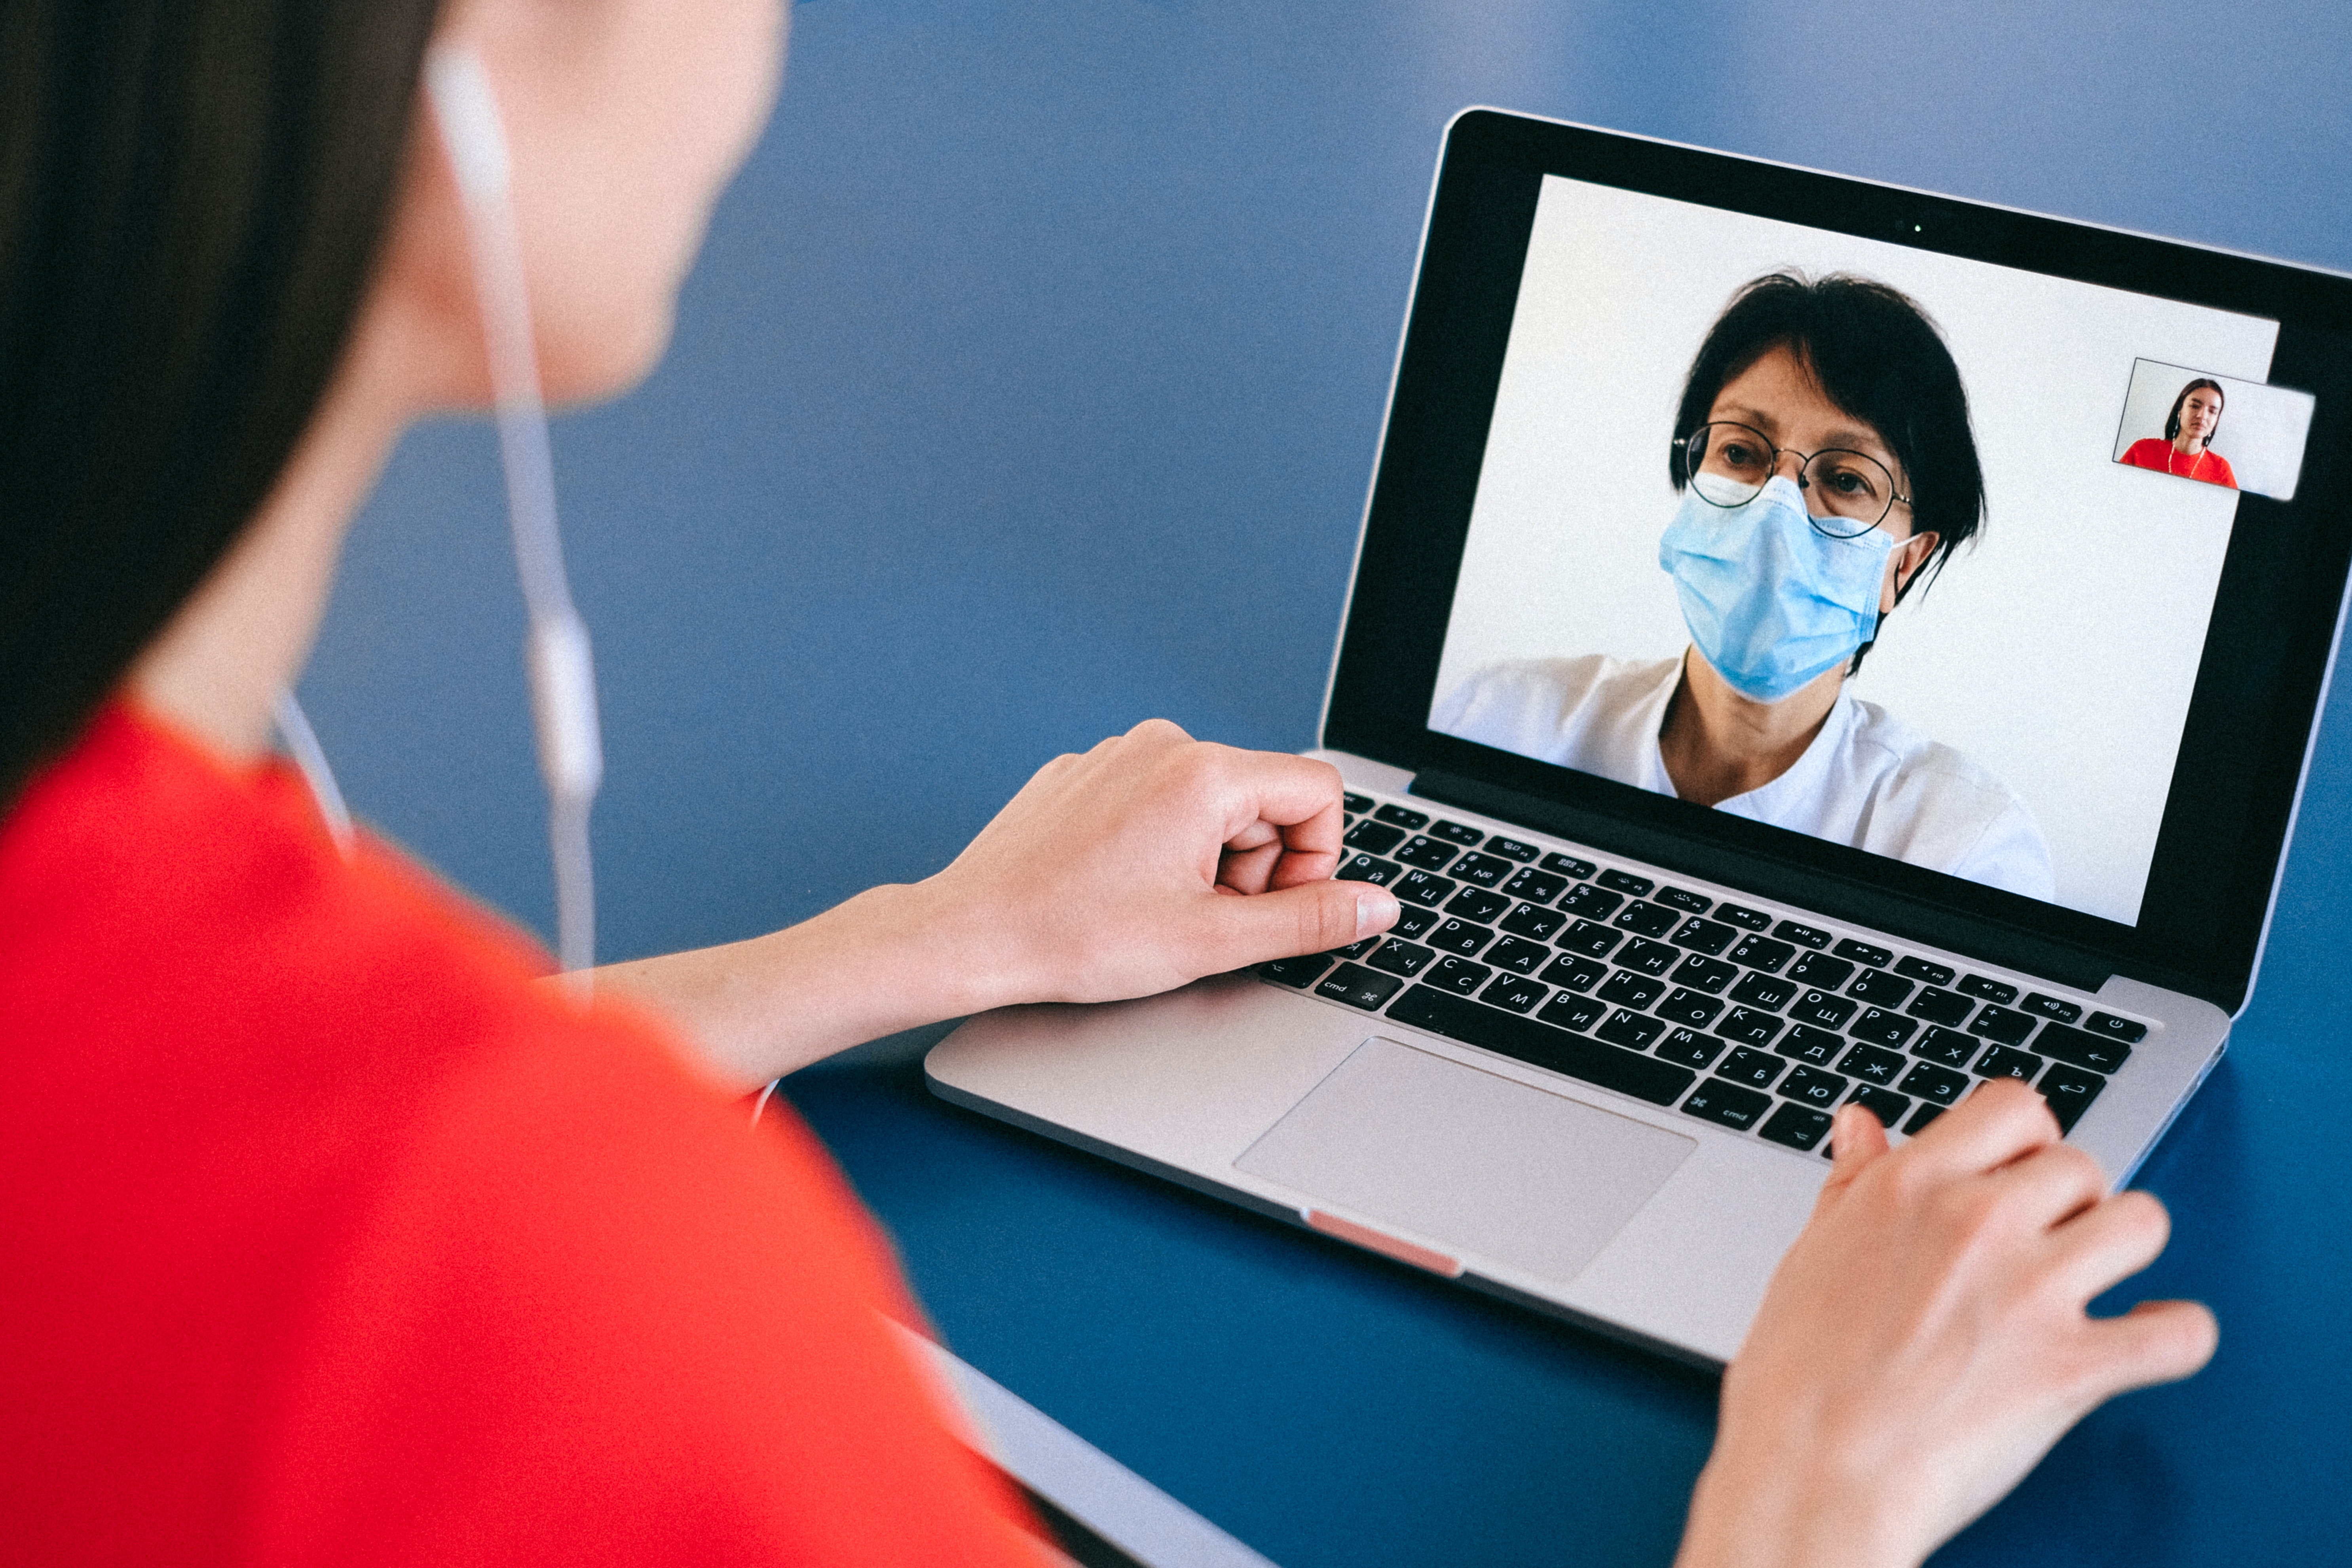 Patient having telehealth appointment Photo by Anna Shvets from Pexels